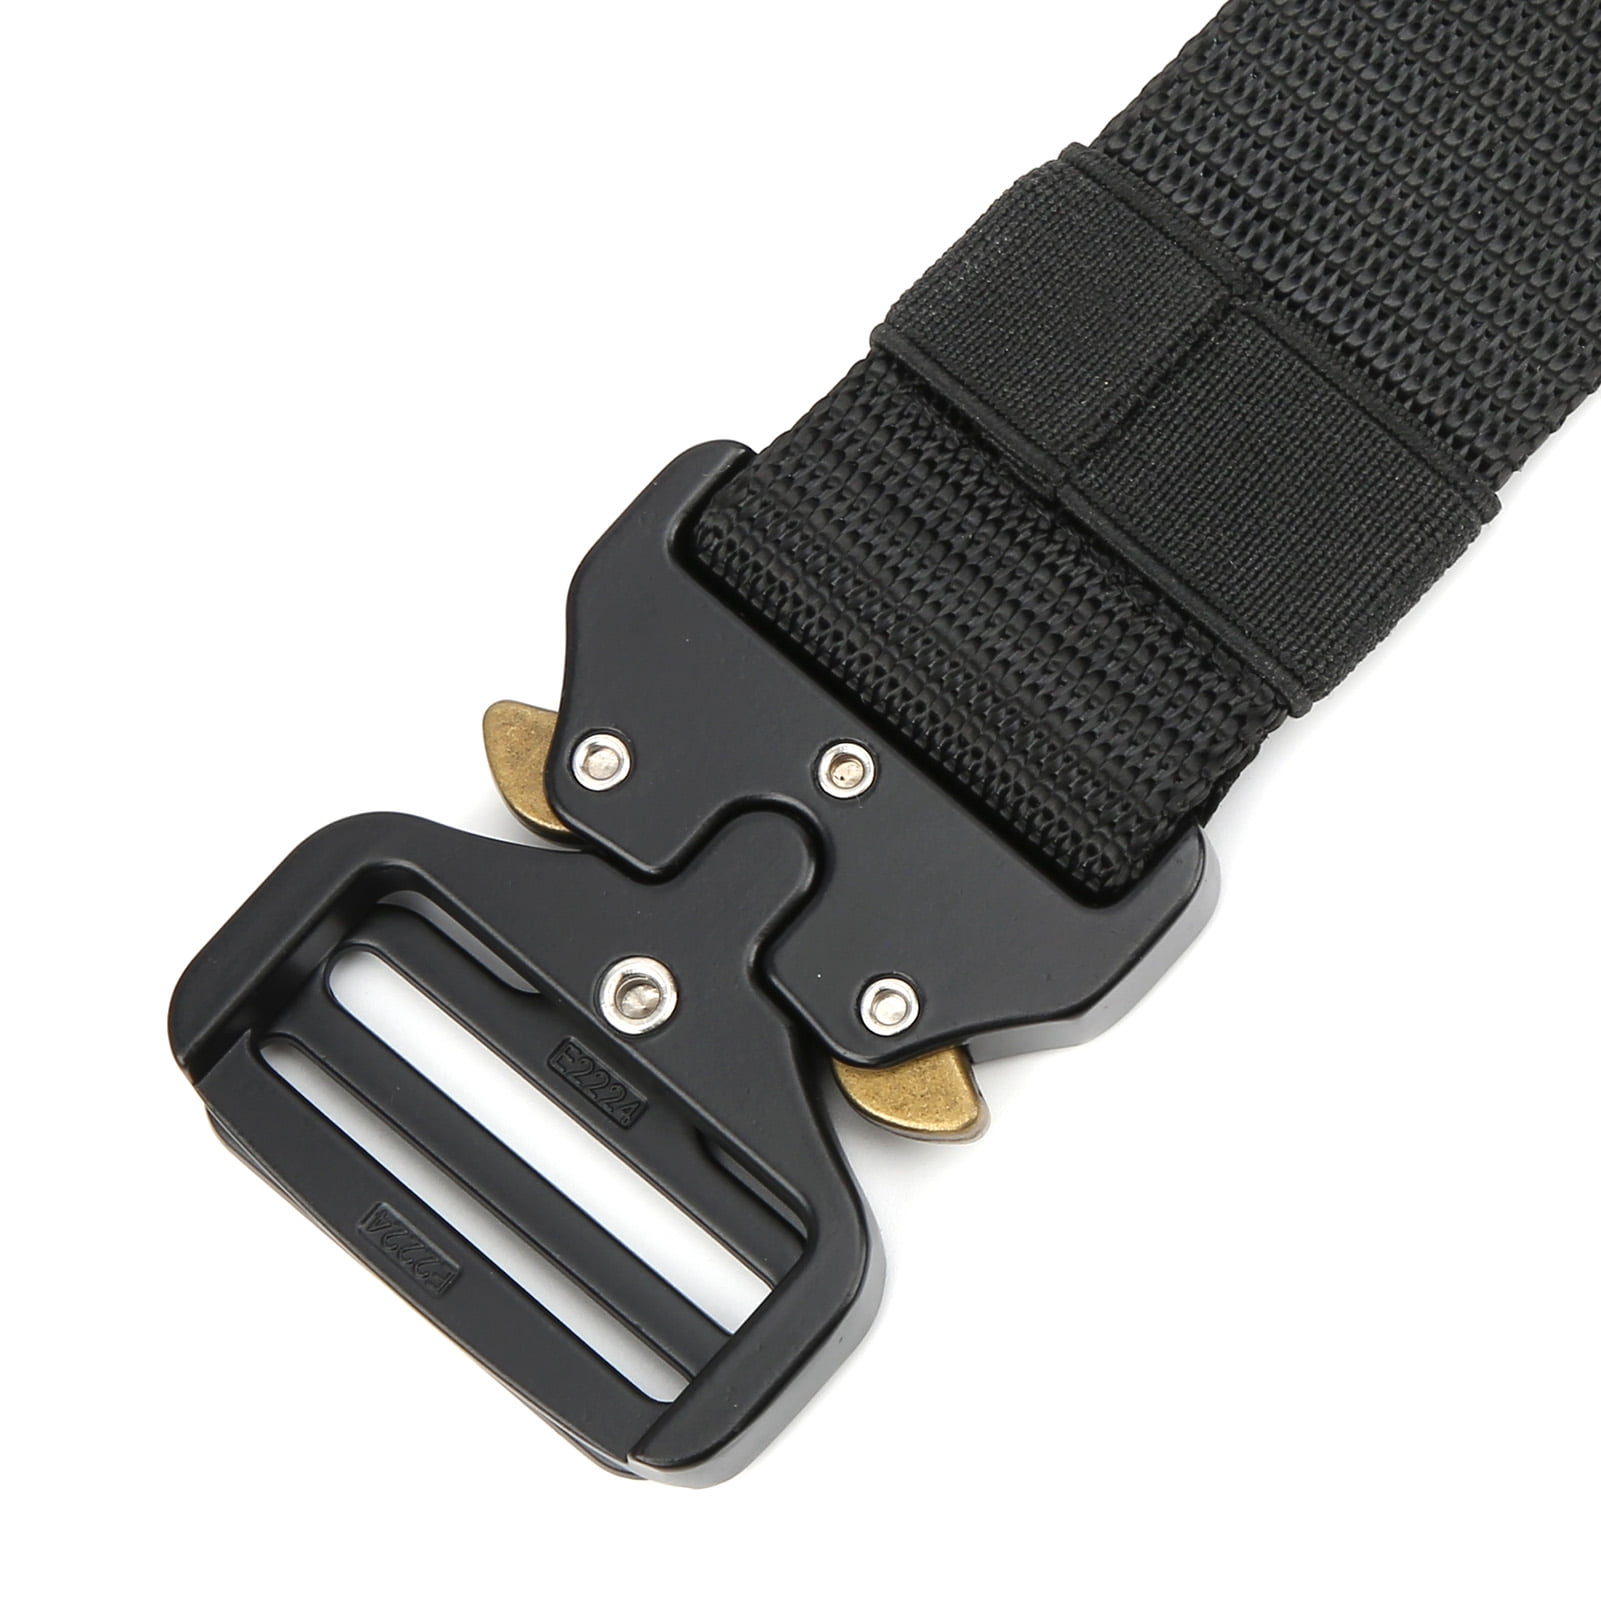 Extra Stretchy GO Belt – As Seen on TV 2 Expandable Pockets 